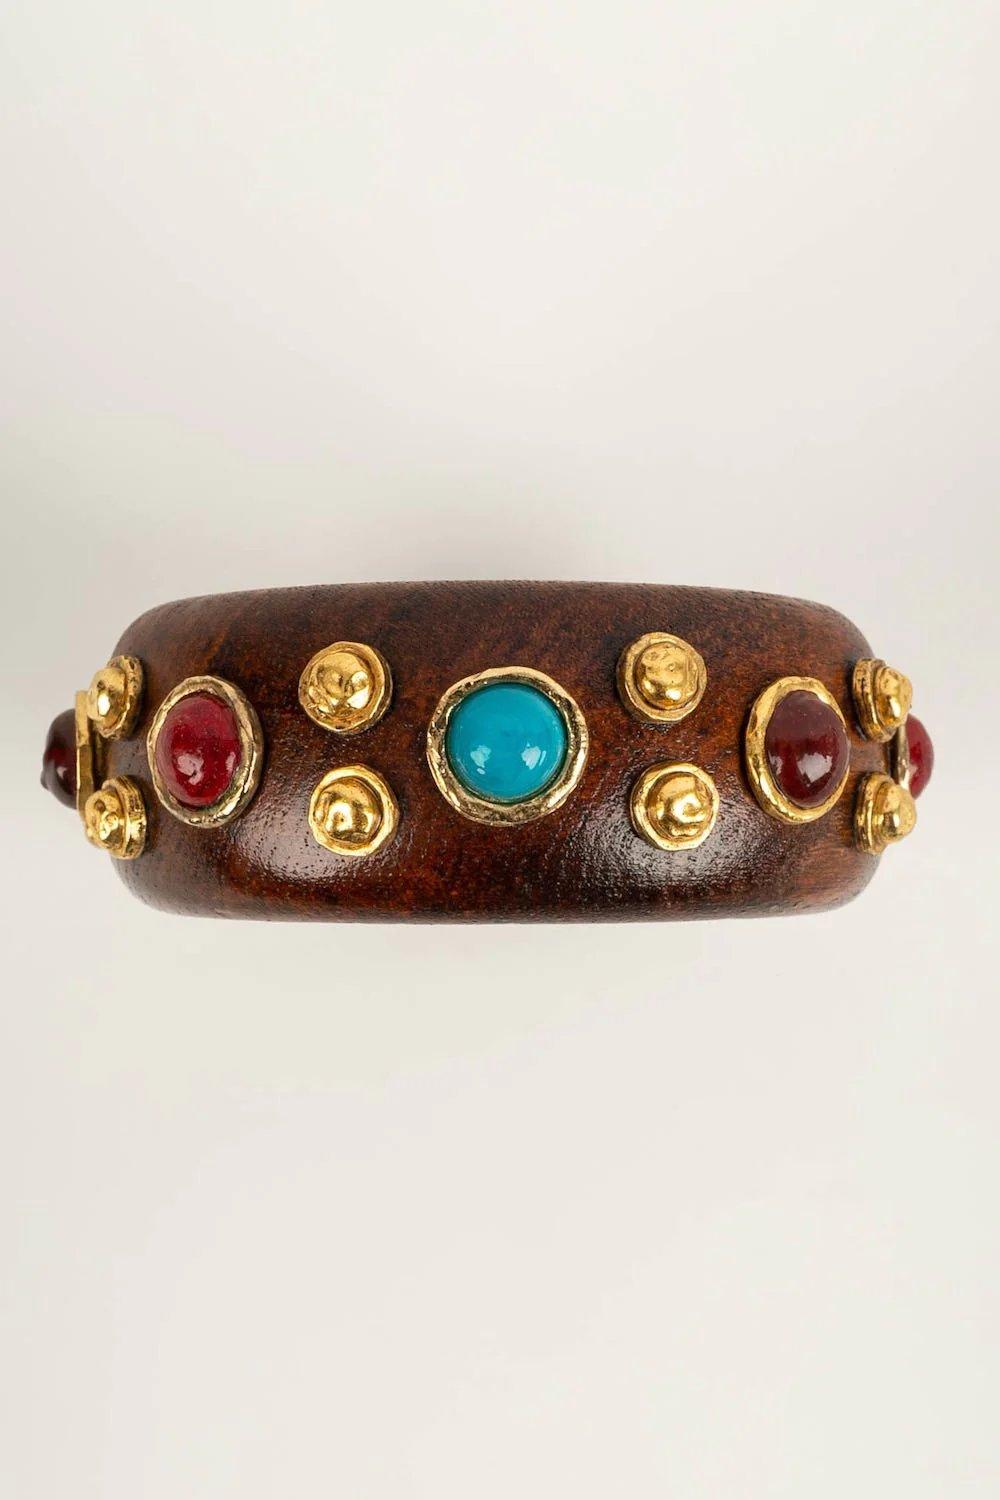 Women's Chanel Wooden and Golden Metal Bracelet Paved with Multicolored Cabochons